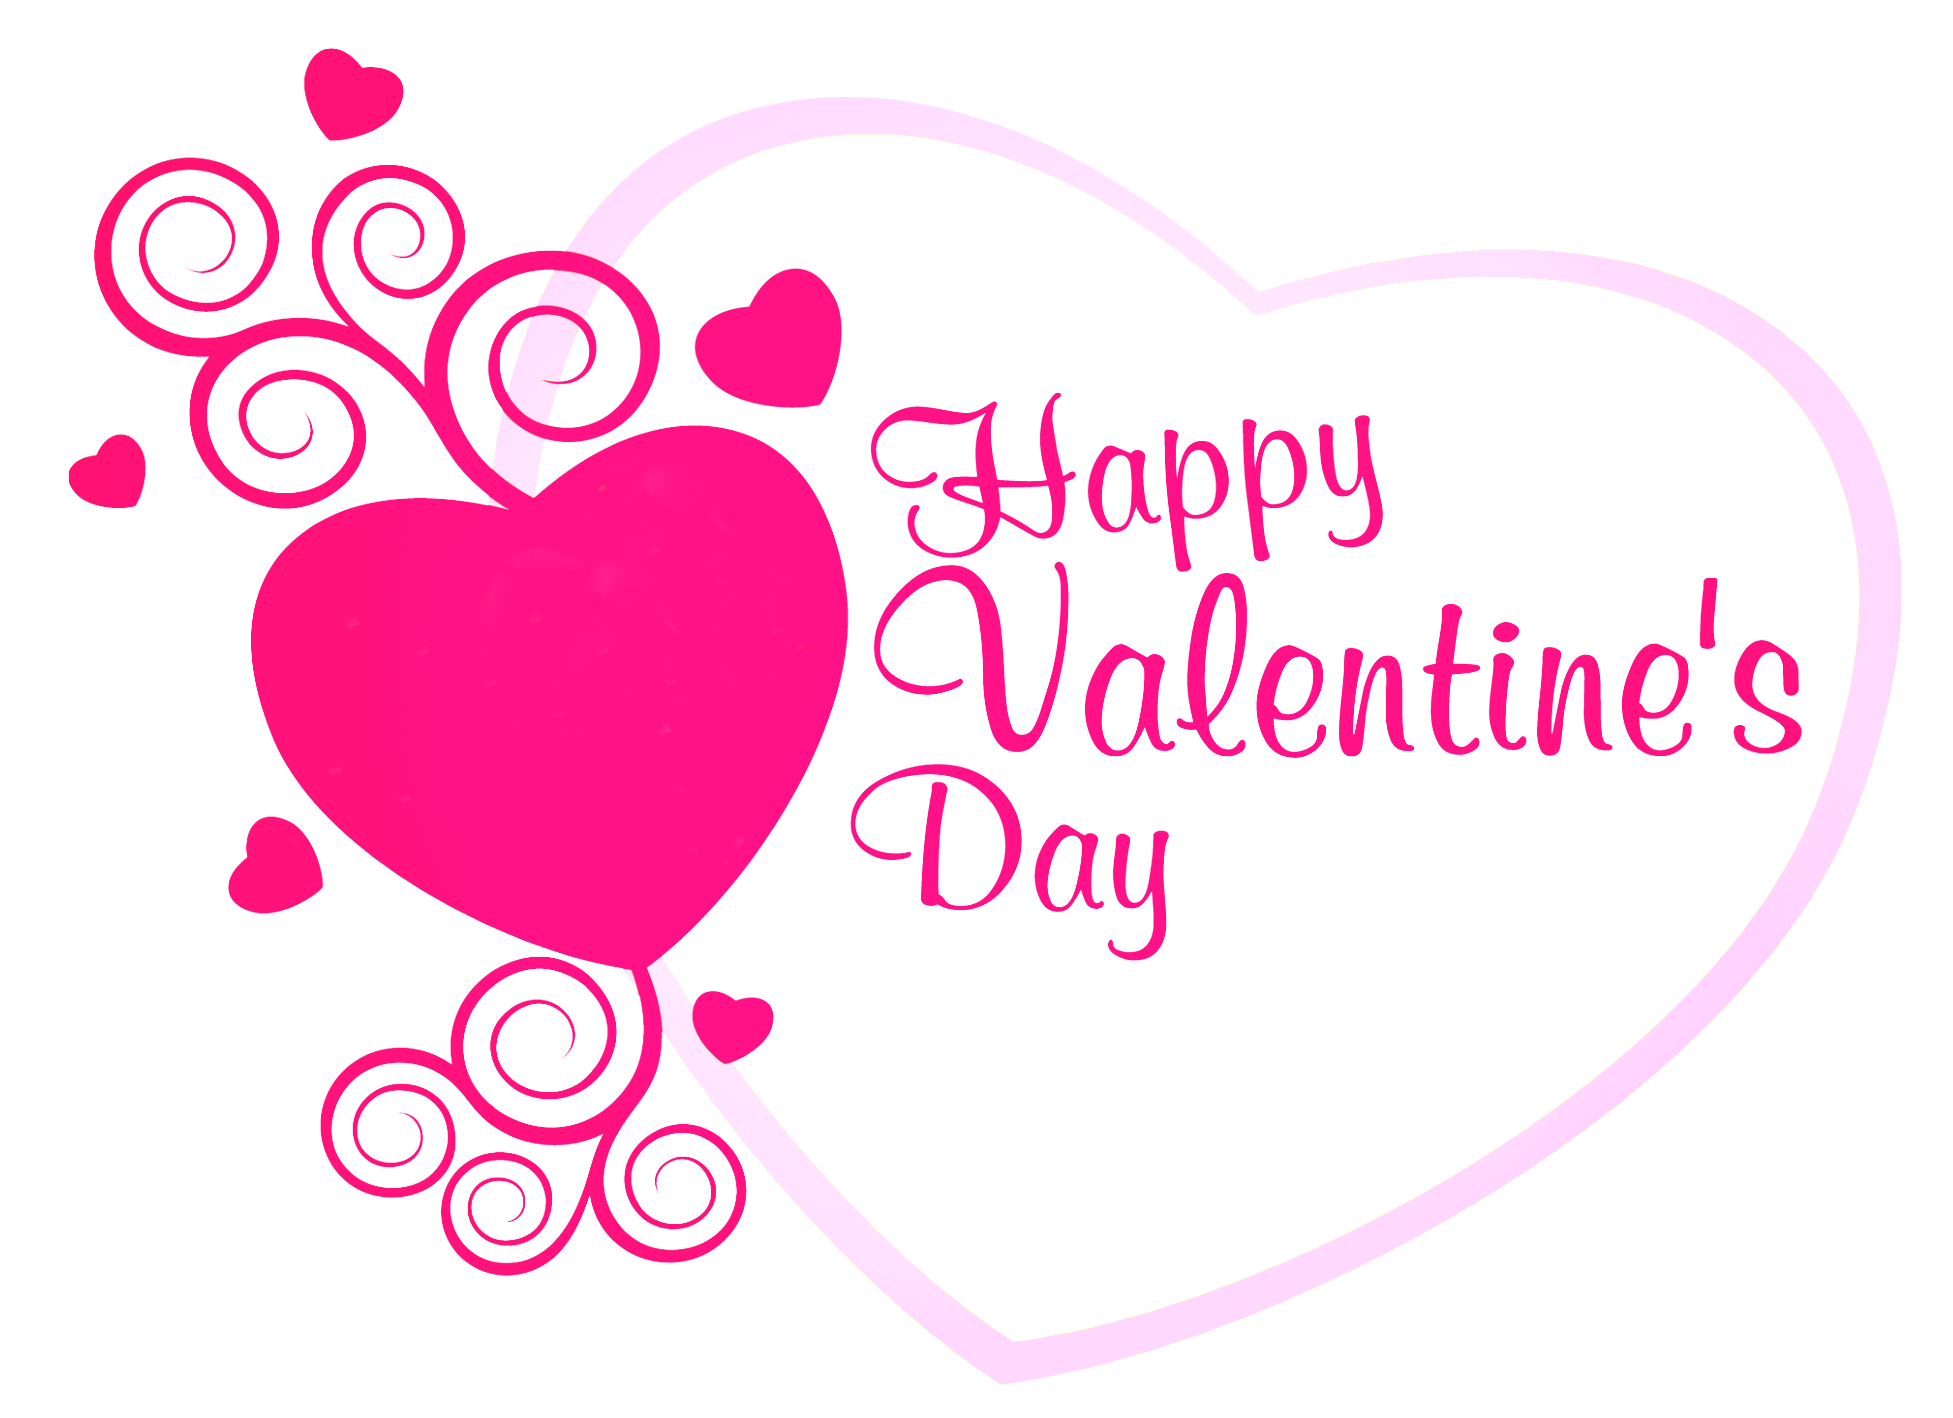 http://gallery.yopriceville.com/var/albums/Free-Clipart-Pictures/Valentine%27s-Day-PNG/Happy_Valentines_Pink_Heart_Decor_PNG_Picture.png?m=1399672800